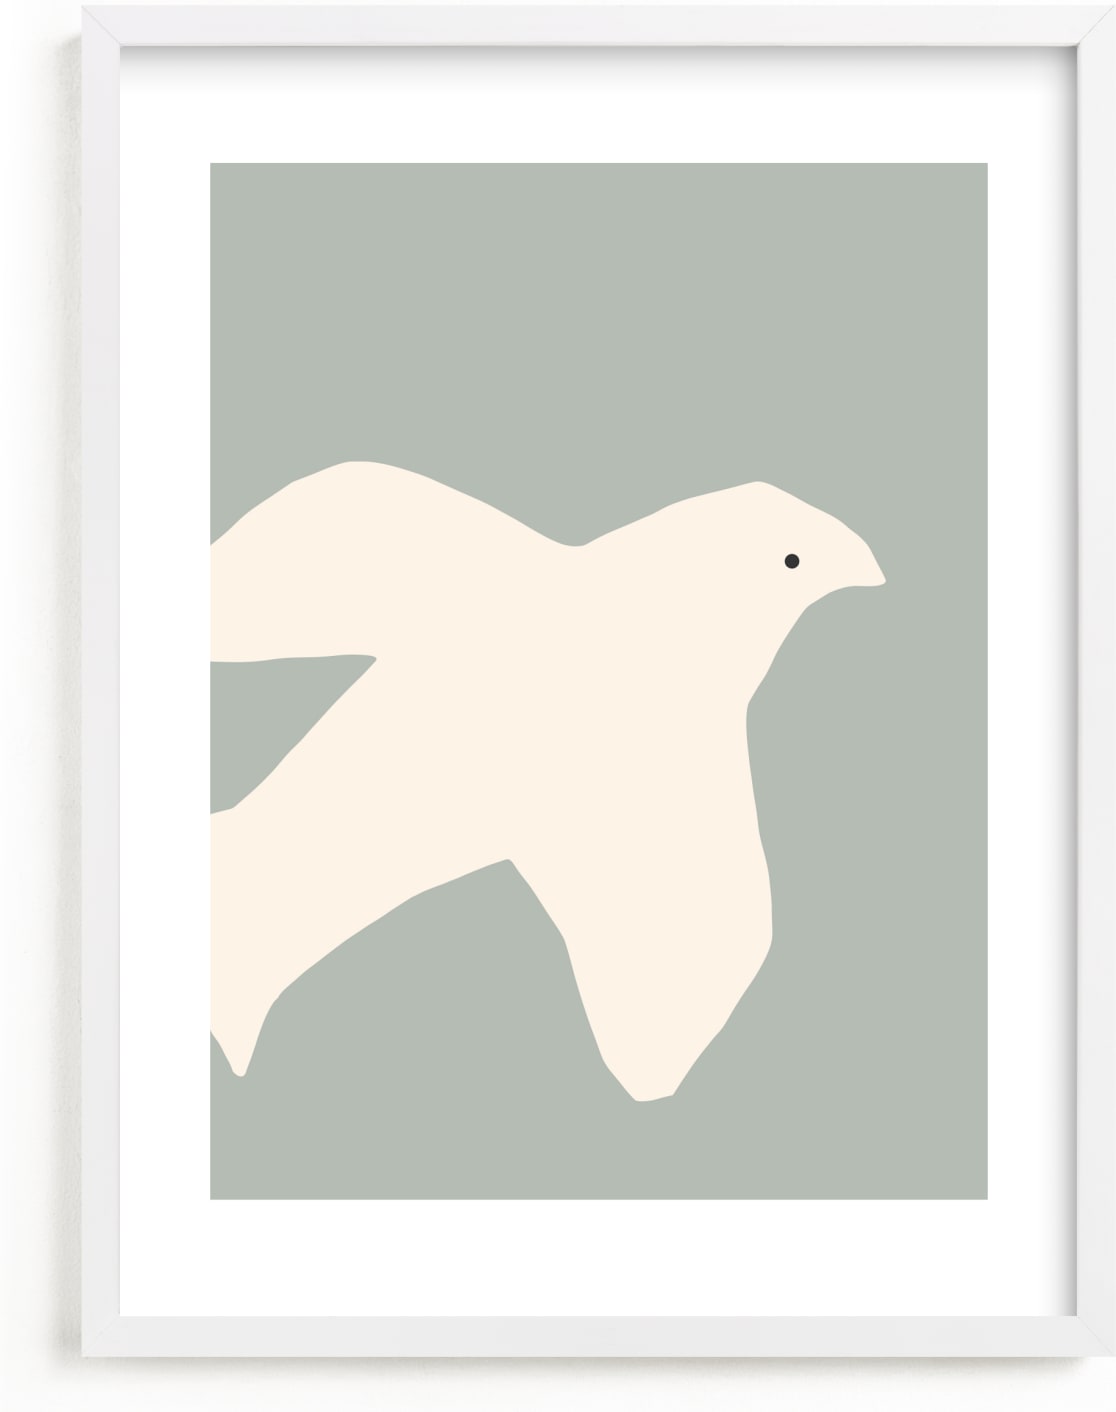 This is a blue nursery wall art by Coit Creative called Summer Dove.